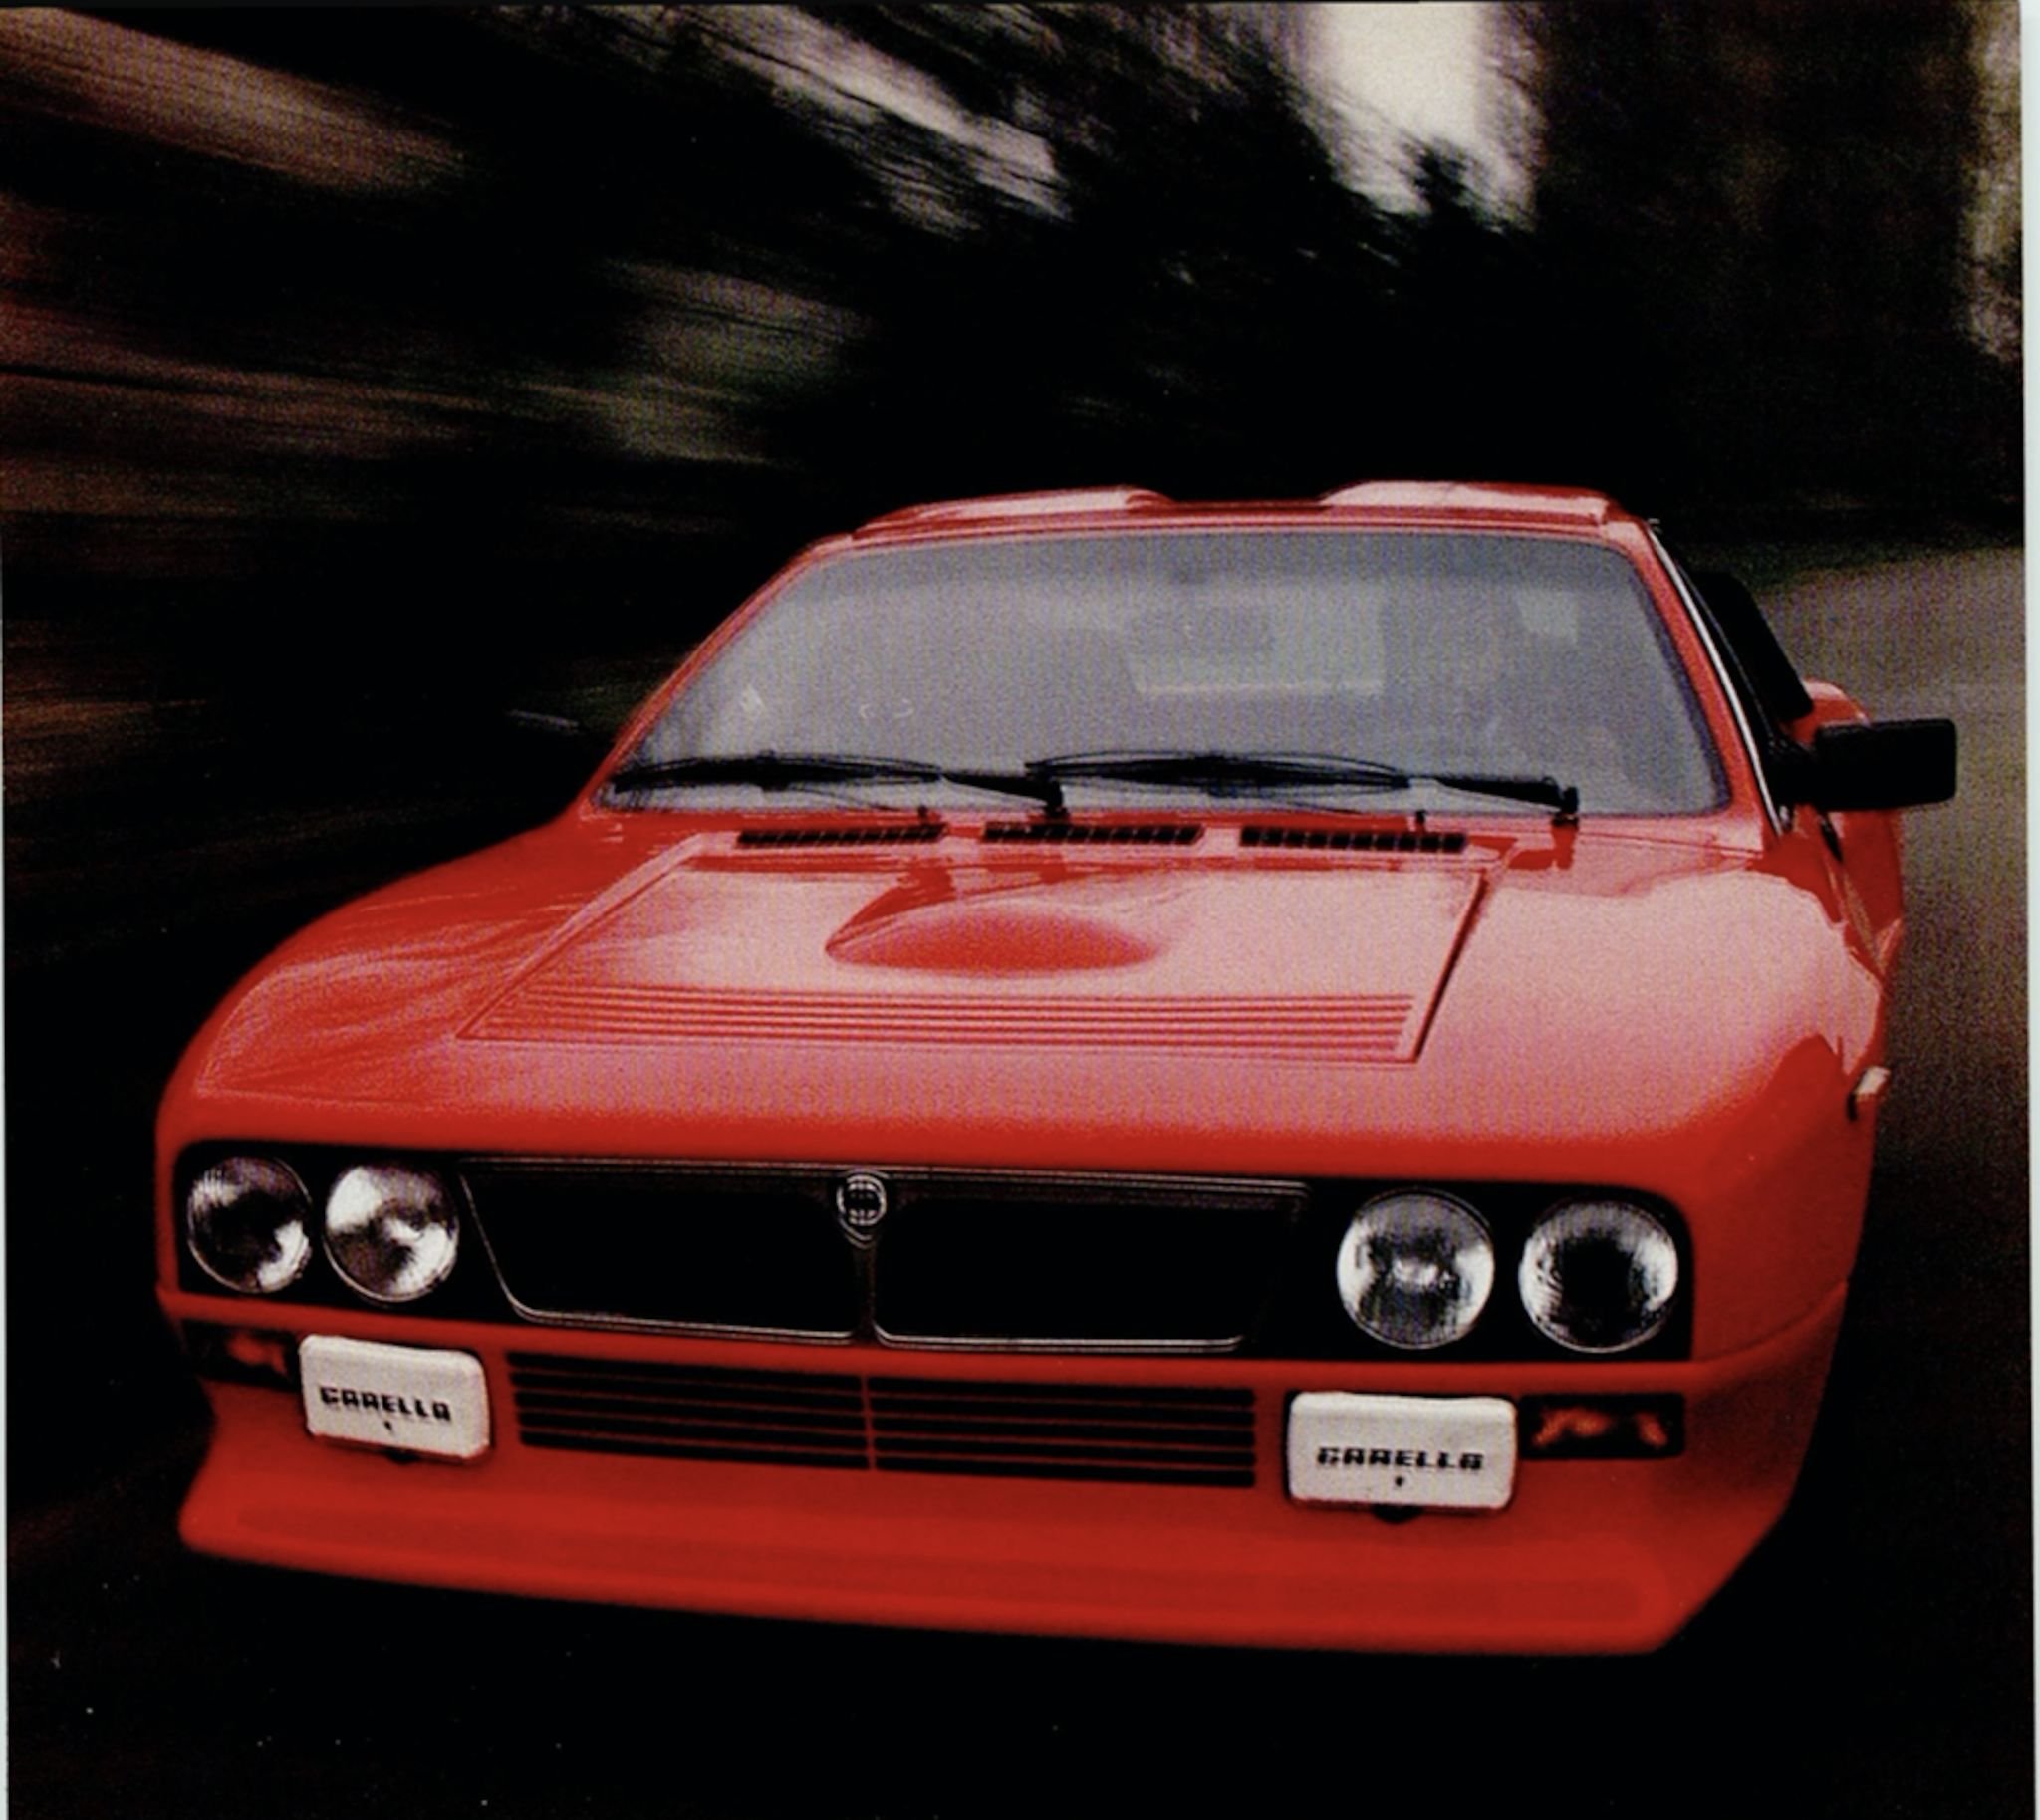 Here's How Close the Lancia Rally Homologation Special Was to the Factory Race Car